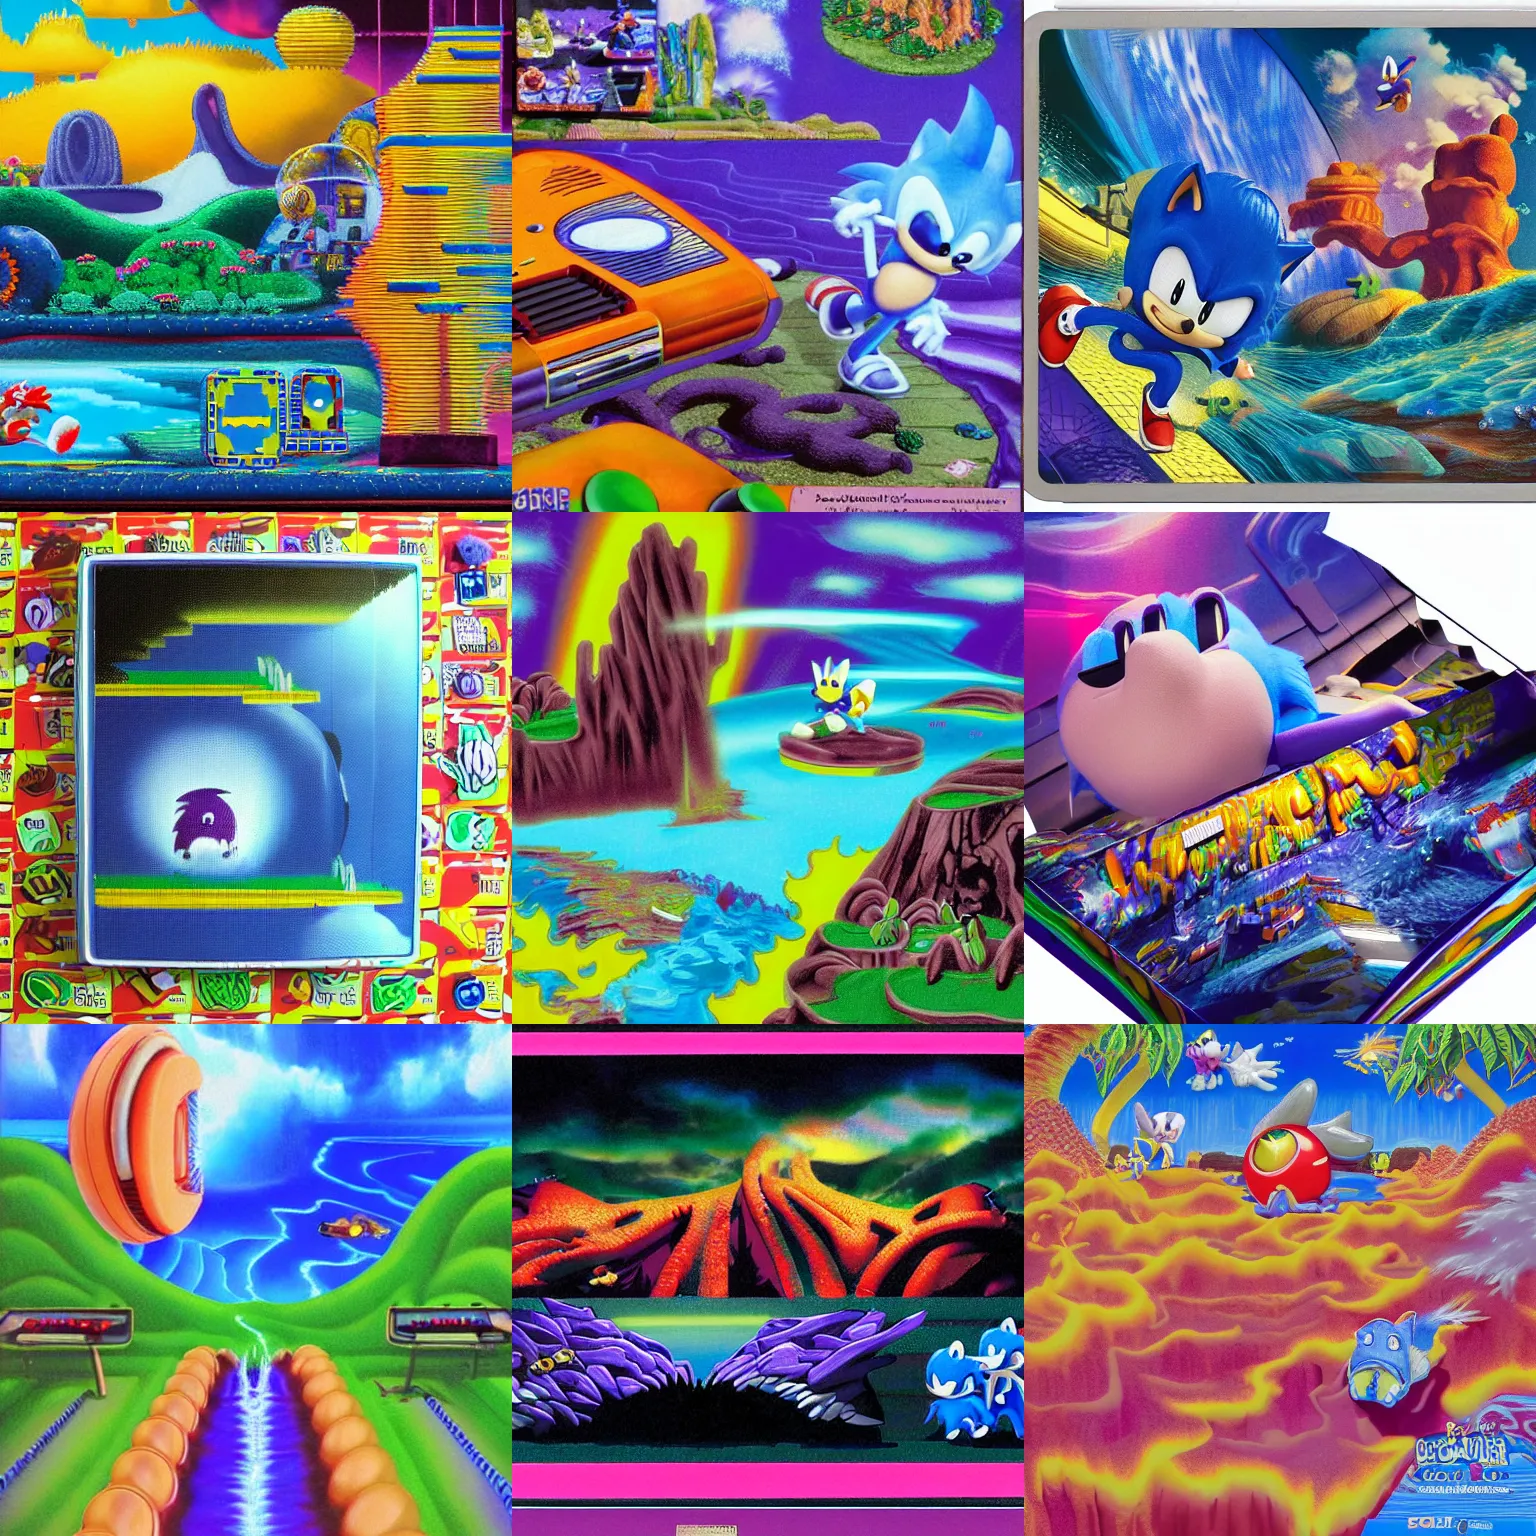 Prompt: sonic hedgehog dreaming of puffy closeup portrait colossal claymation scifi matte painting landscape of a surreal lava, retro moulded professional wooden pastels high quality airbrush art tawdry album peaceful of a liquid dissolving airbrush art lsd sonic the hedgehog swimming through cyberspace purple ambiguous checkerboard background 1 9 8 0 s 1 9 8 2 sega genesis video game album cover